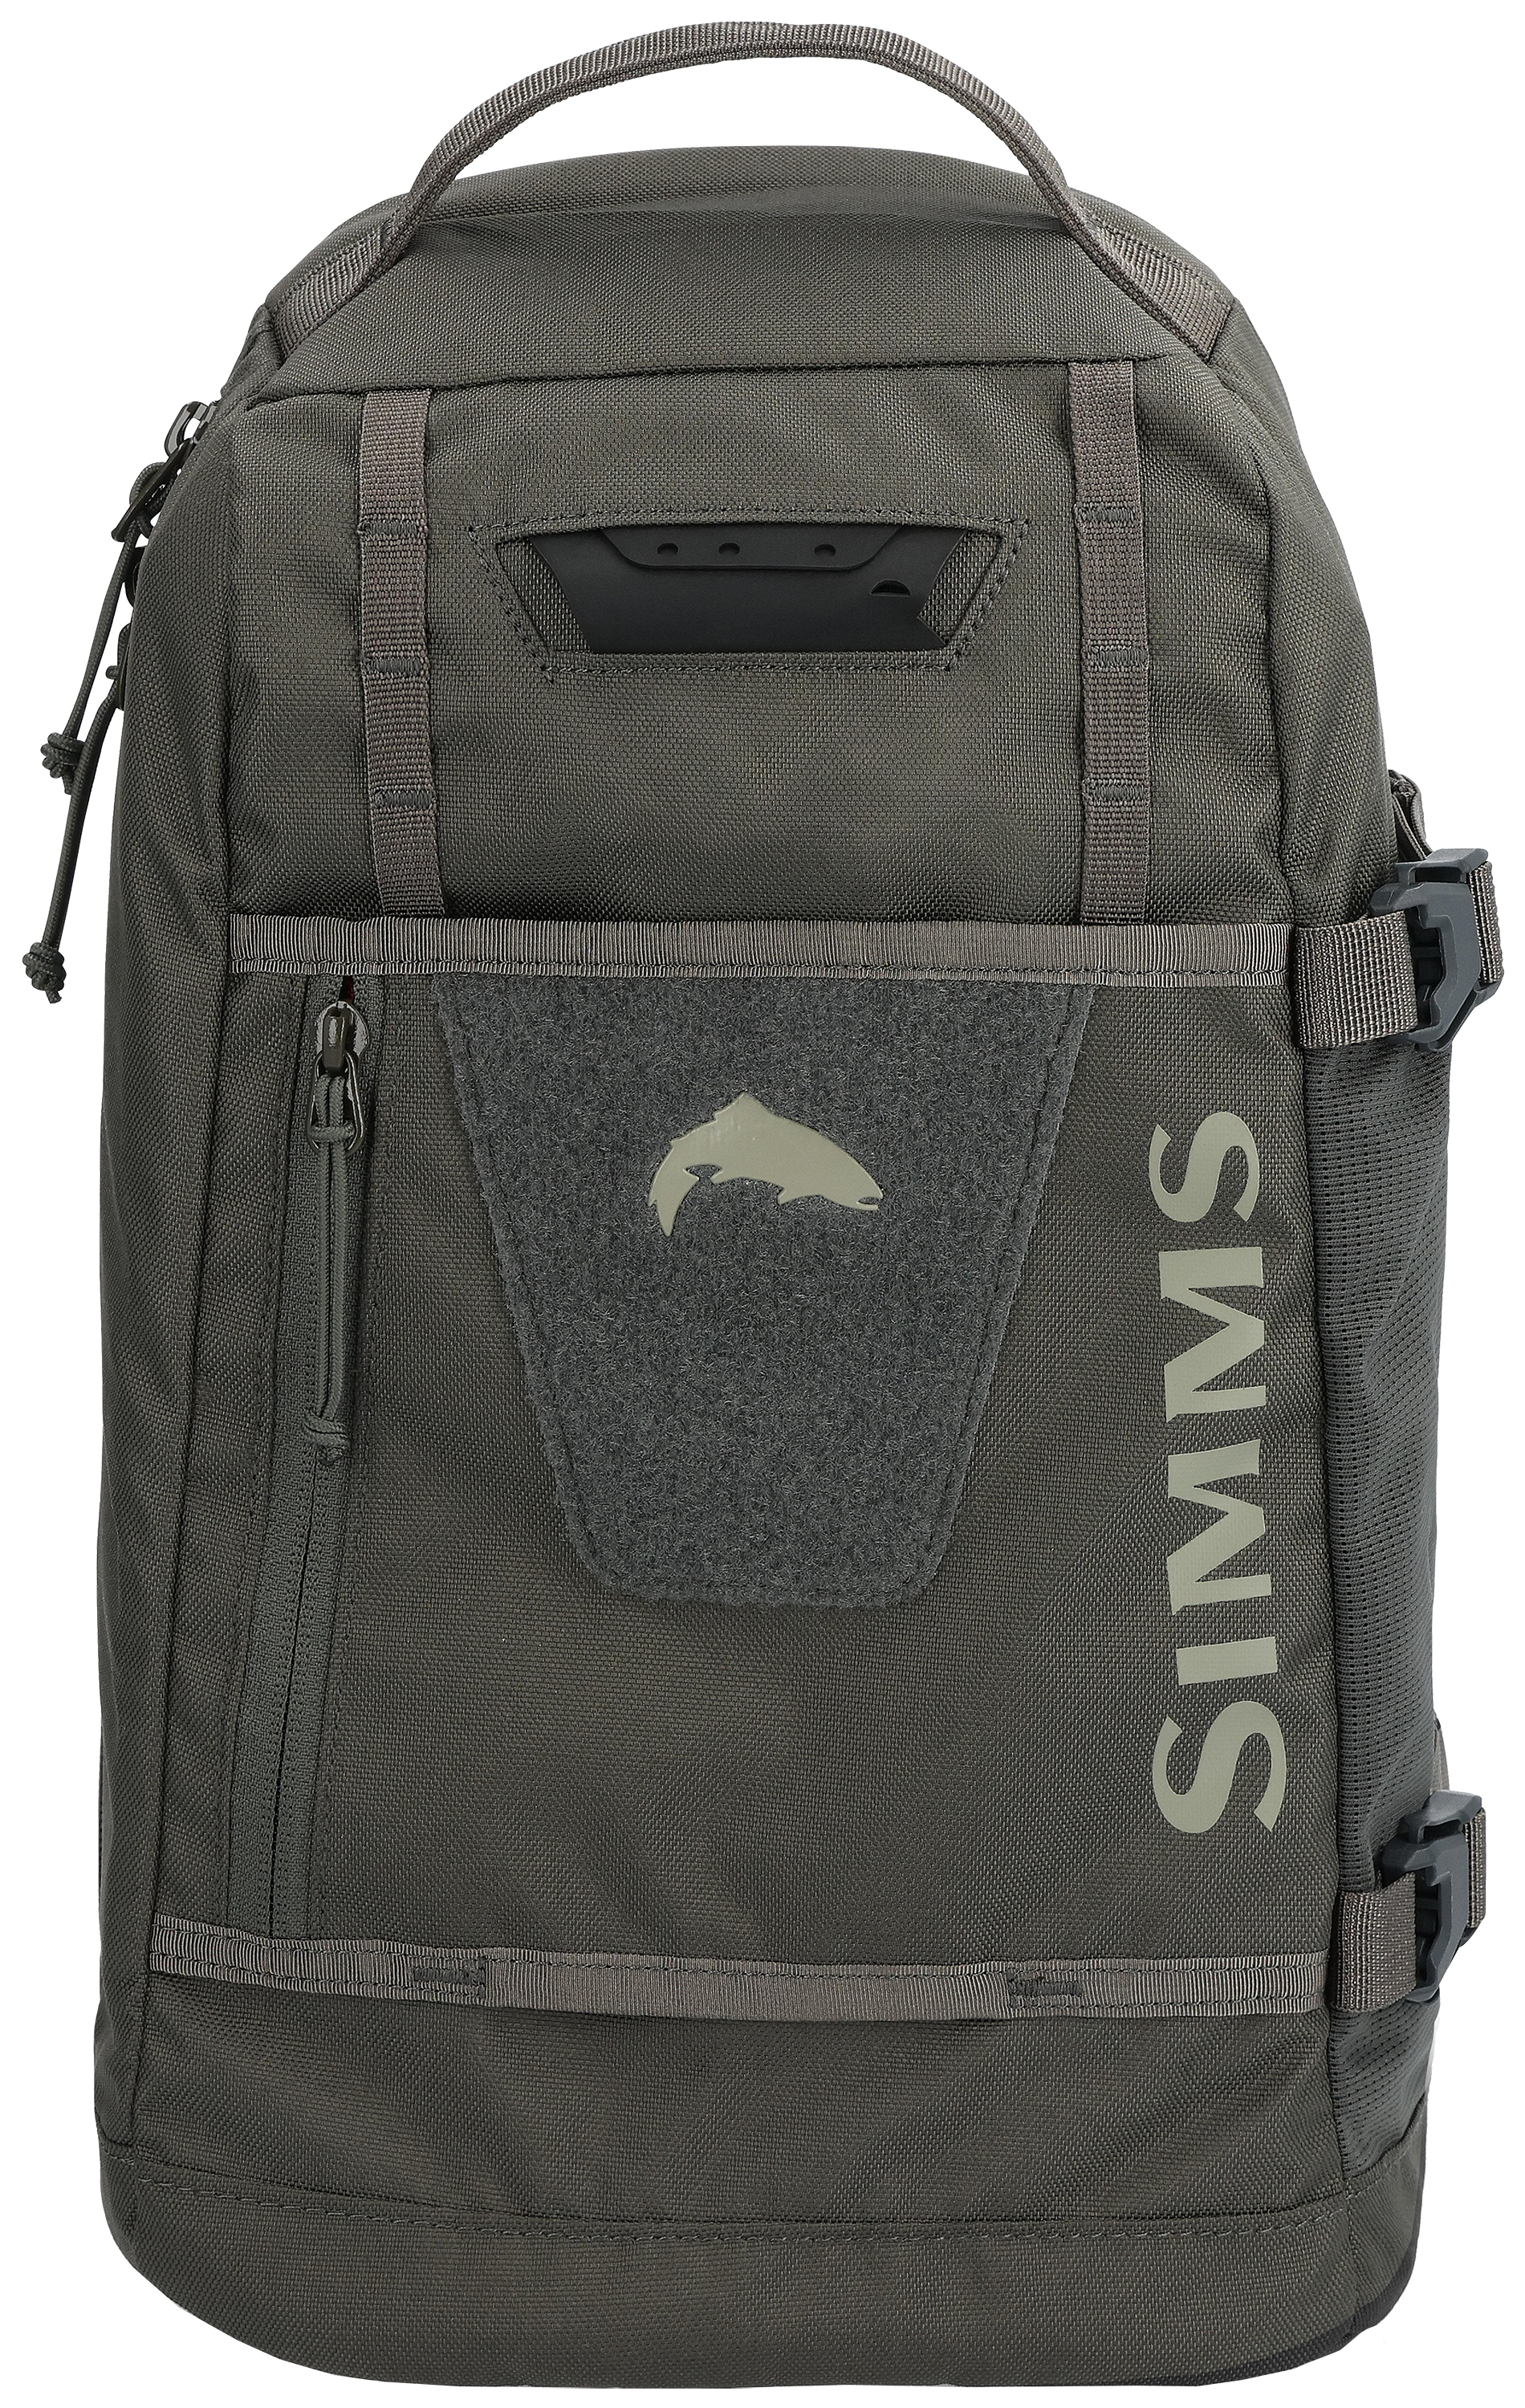 Simms Tributary Sling Pack regiment camo olive drab